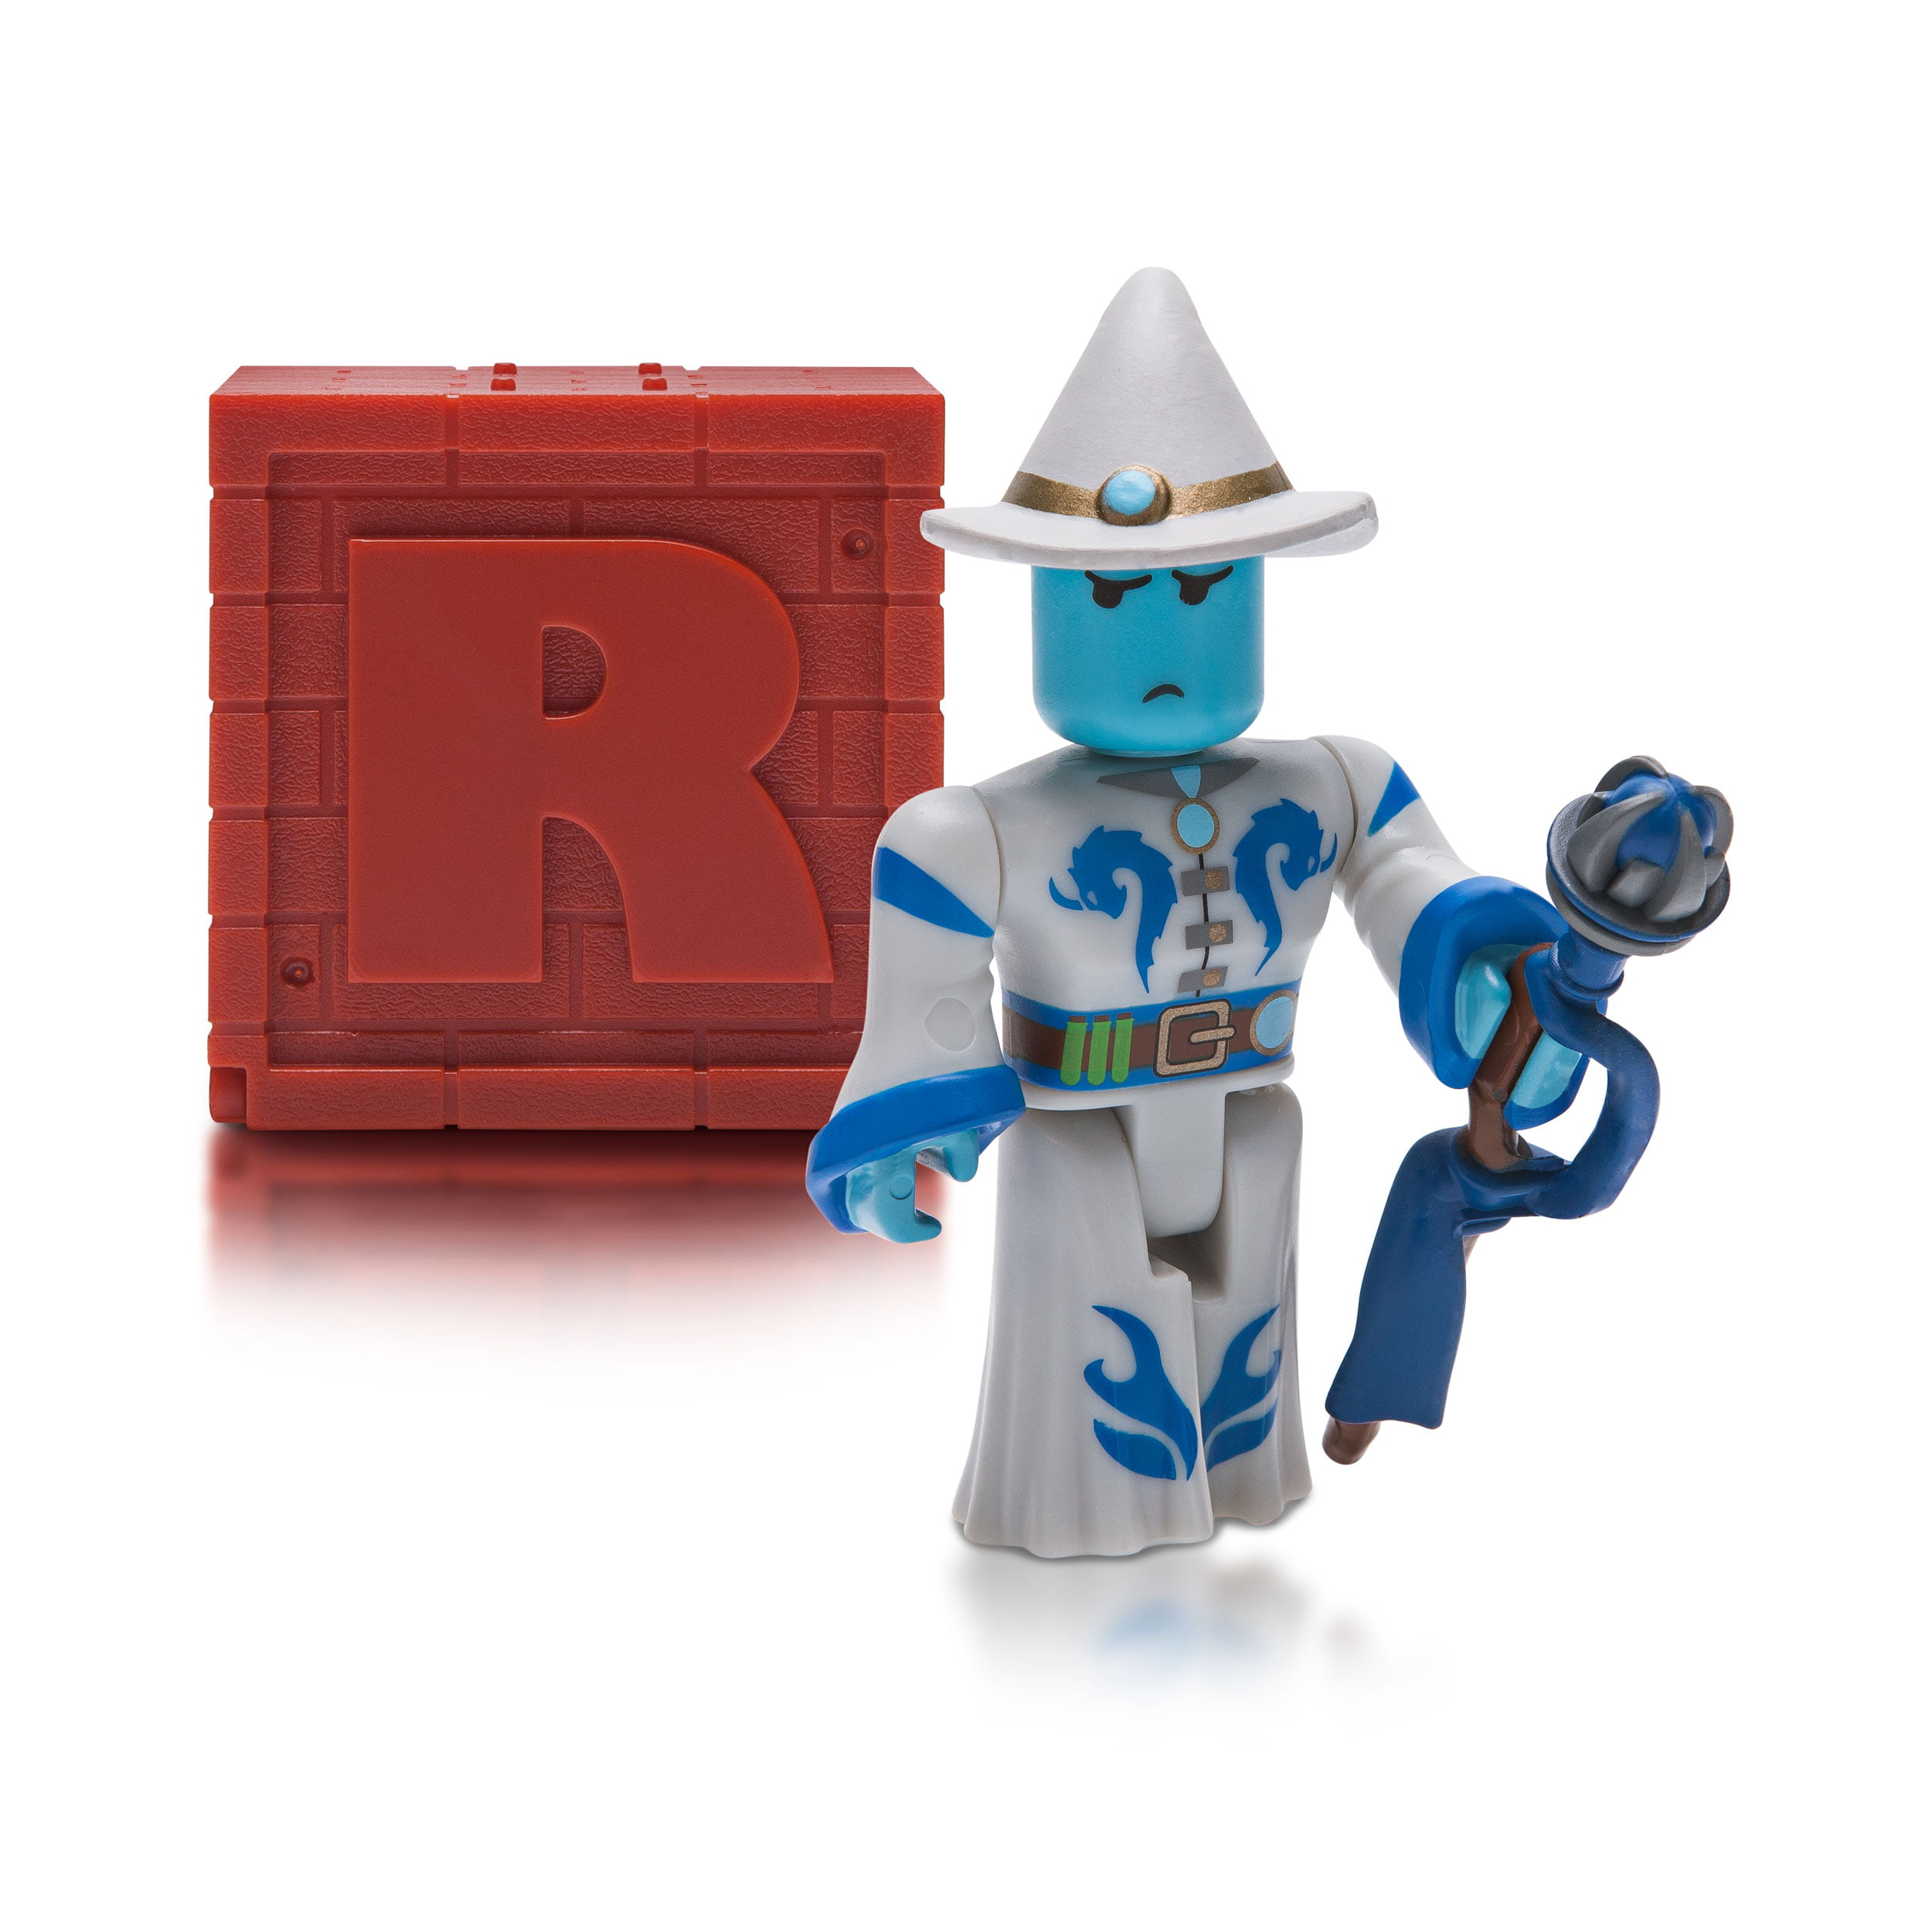 Roblox Action Collection Series 4 Mystery Figure 2 Pack Includes 2 Figures 2 Exclusive Virtual Items Walmart Com Walmart Com - details about blue collar cat roblox mini figure w virtual game code celebrity series 2 new